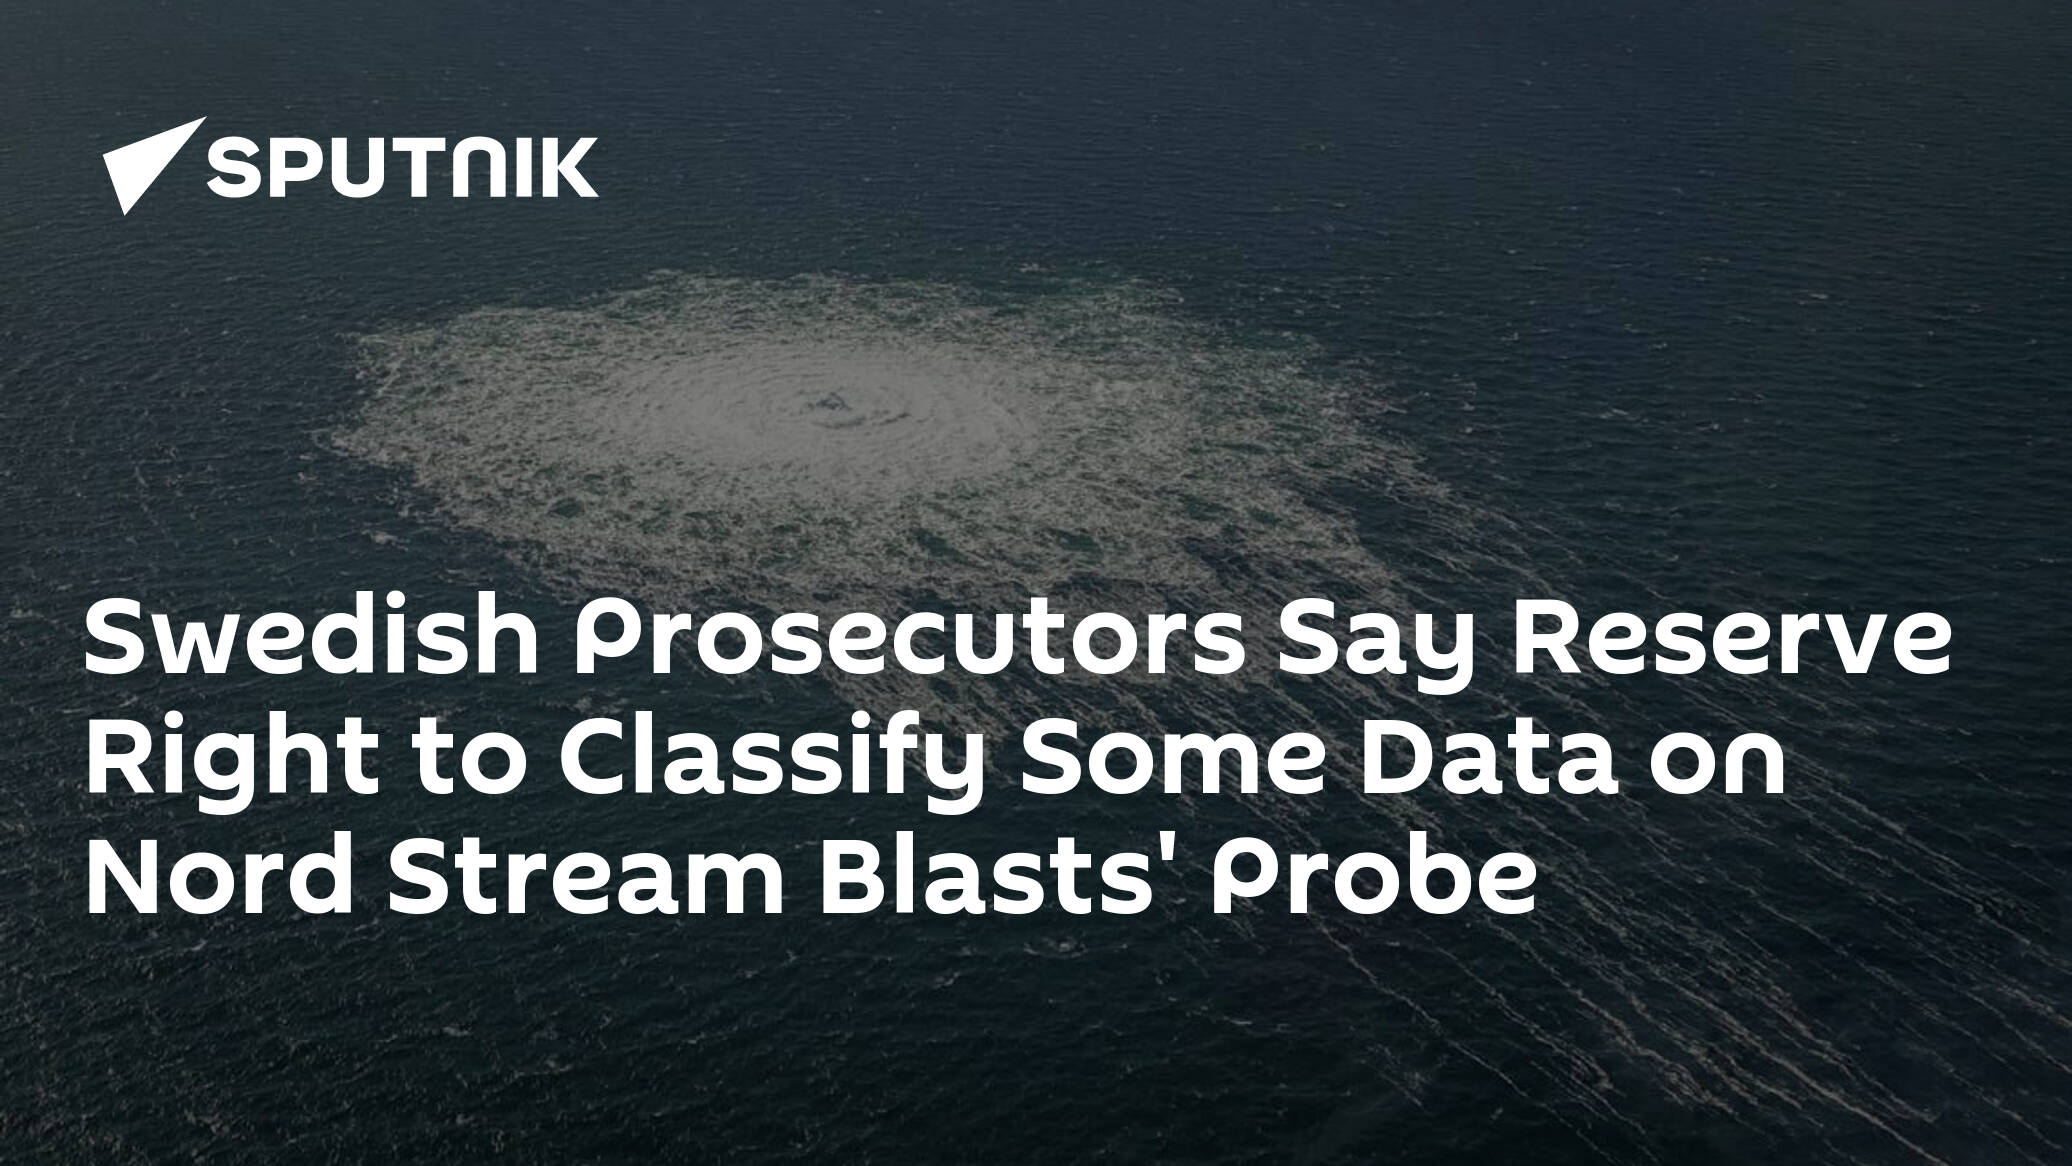 Swedish Prosecutors Say Reserve Right to Classify Some Data on Nord Stream Blasts' Probe